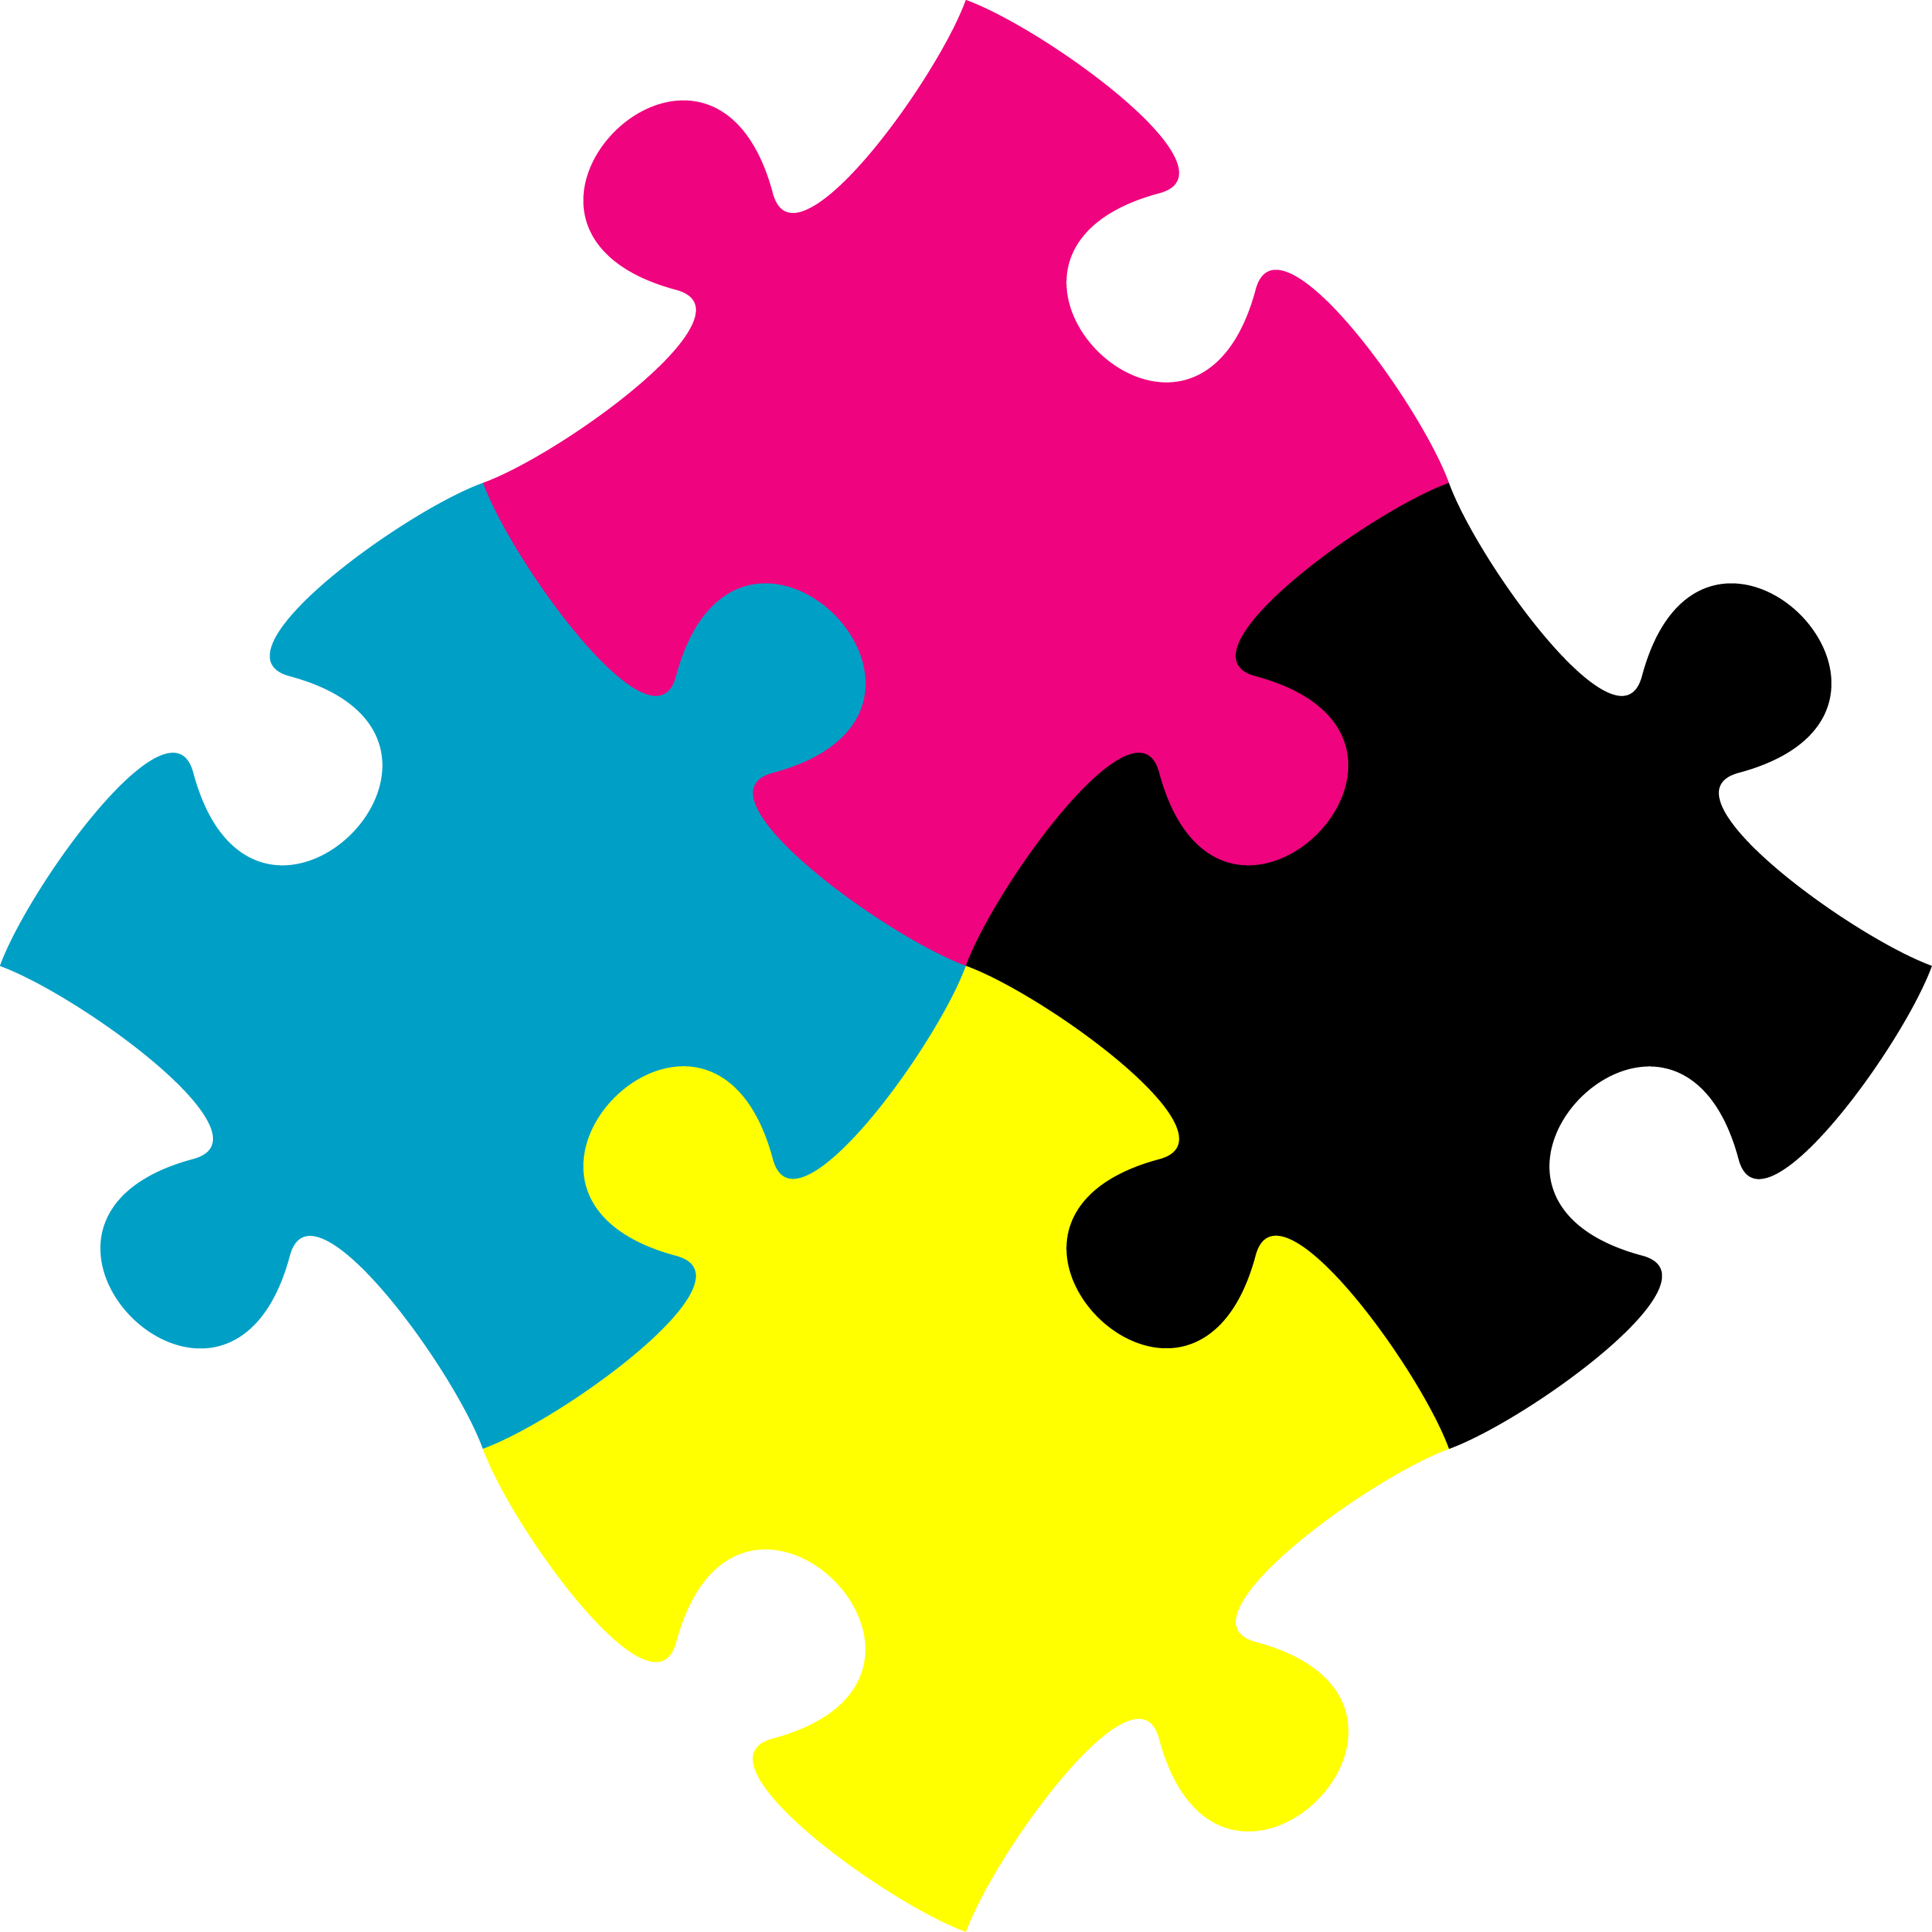 Png Jigsaw Puzzle Pieces - Jigsaw Puzzle Free Png Image, Transparent background PNG HD thumbnail